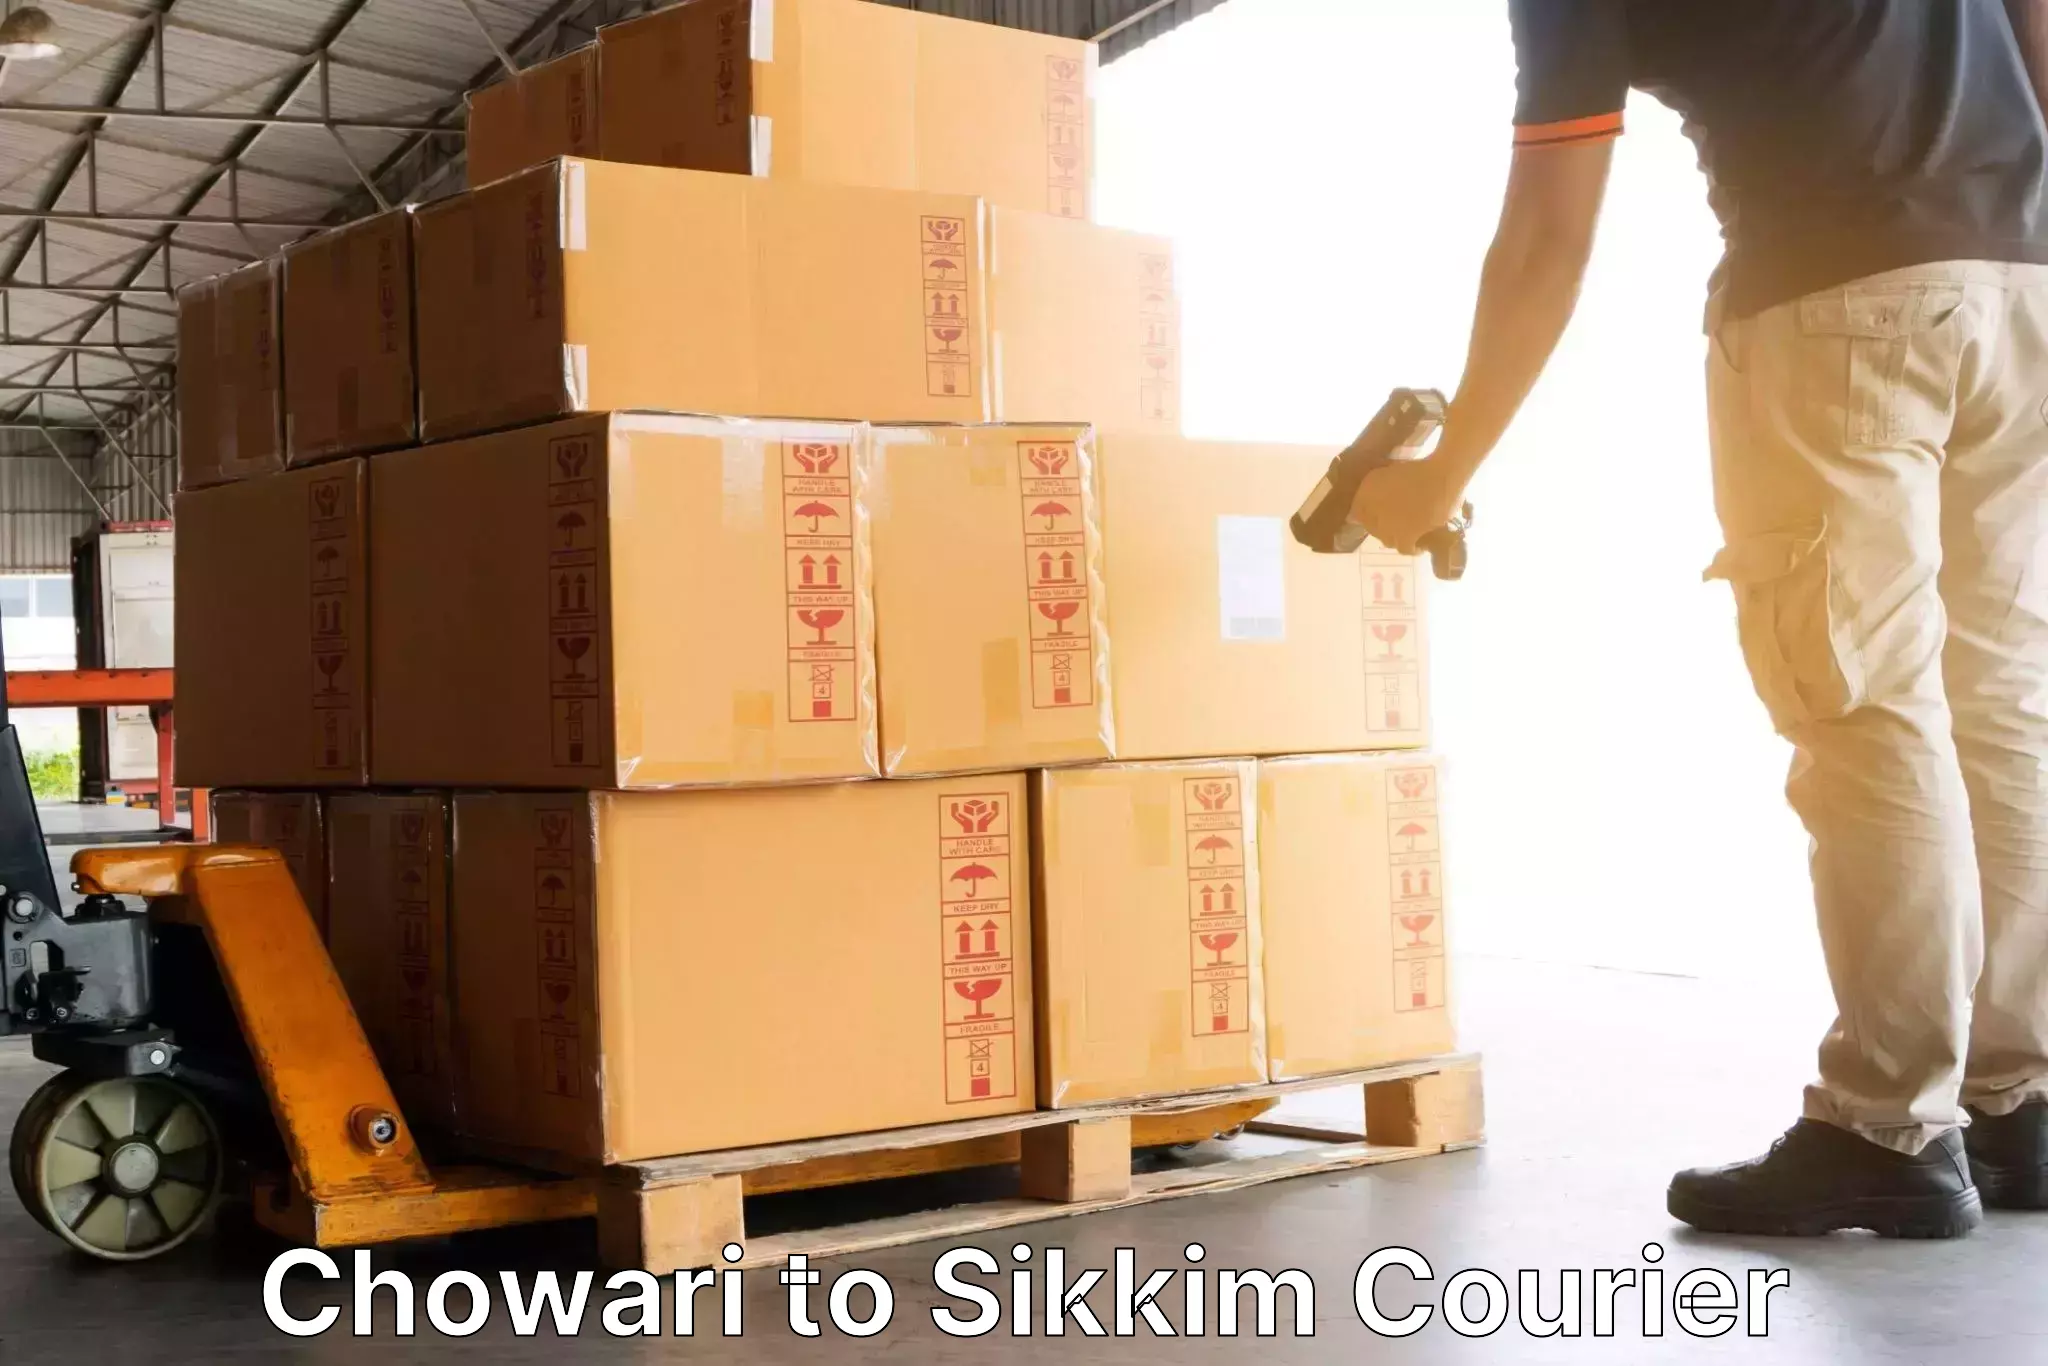 Local courier options in Chowari to Sikkim